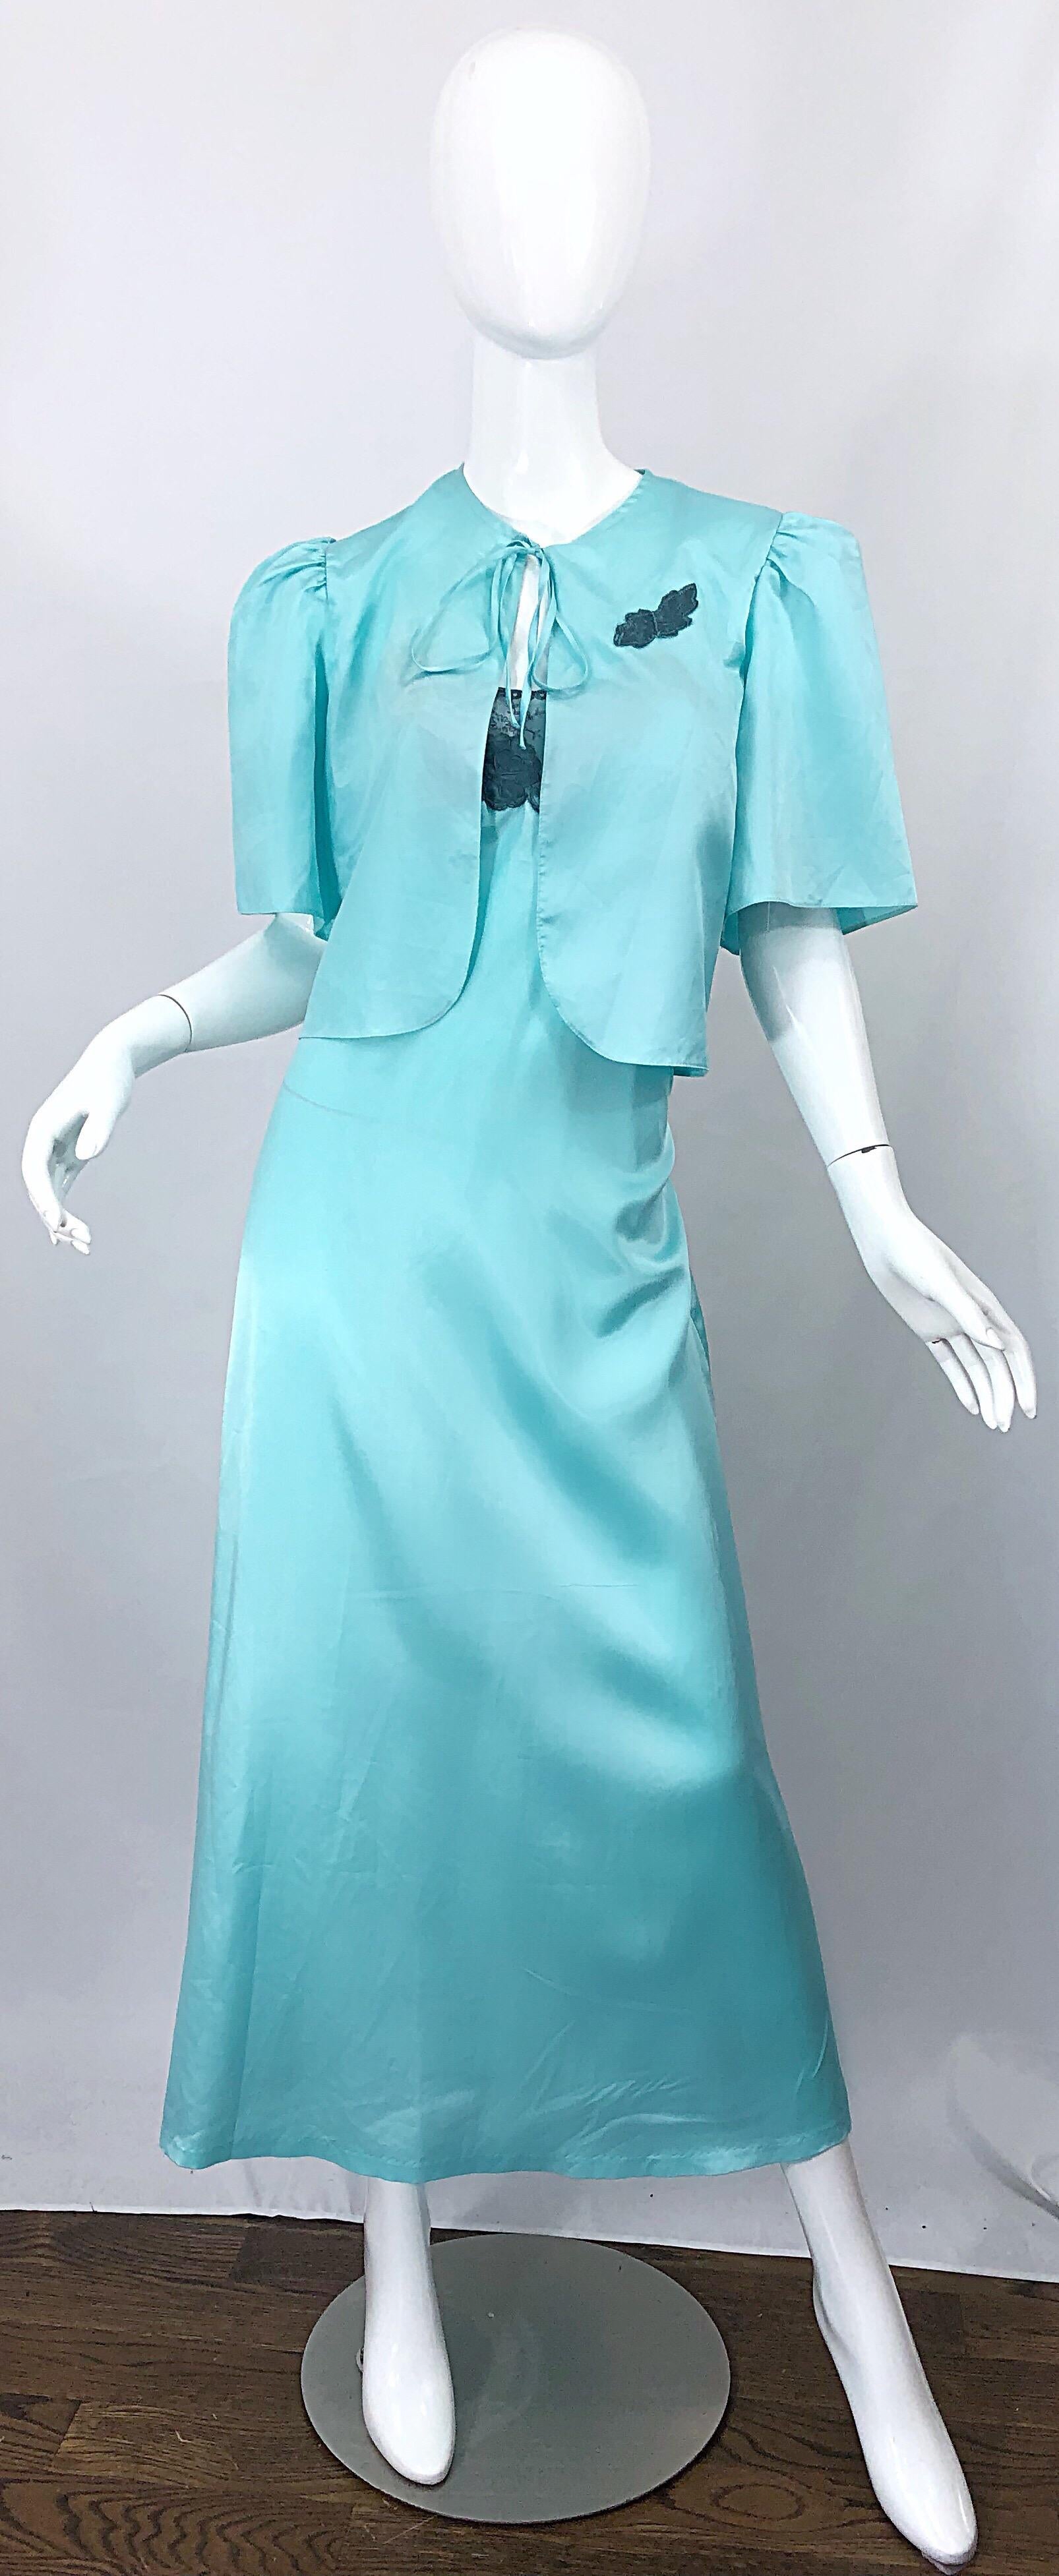 Beautiful 1980s vintage YVES SAINT LAURENT YSL robins egg blue silky nightgown and bed jacket! Features lace and embroidery throughout. Racerback with two straps at each back shoulder. Peek-a-boo lace inset on front and back reveals just the right